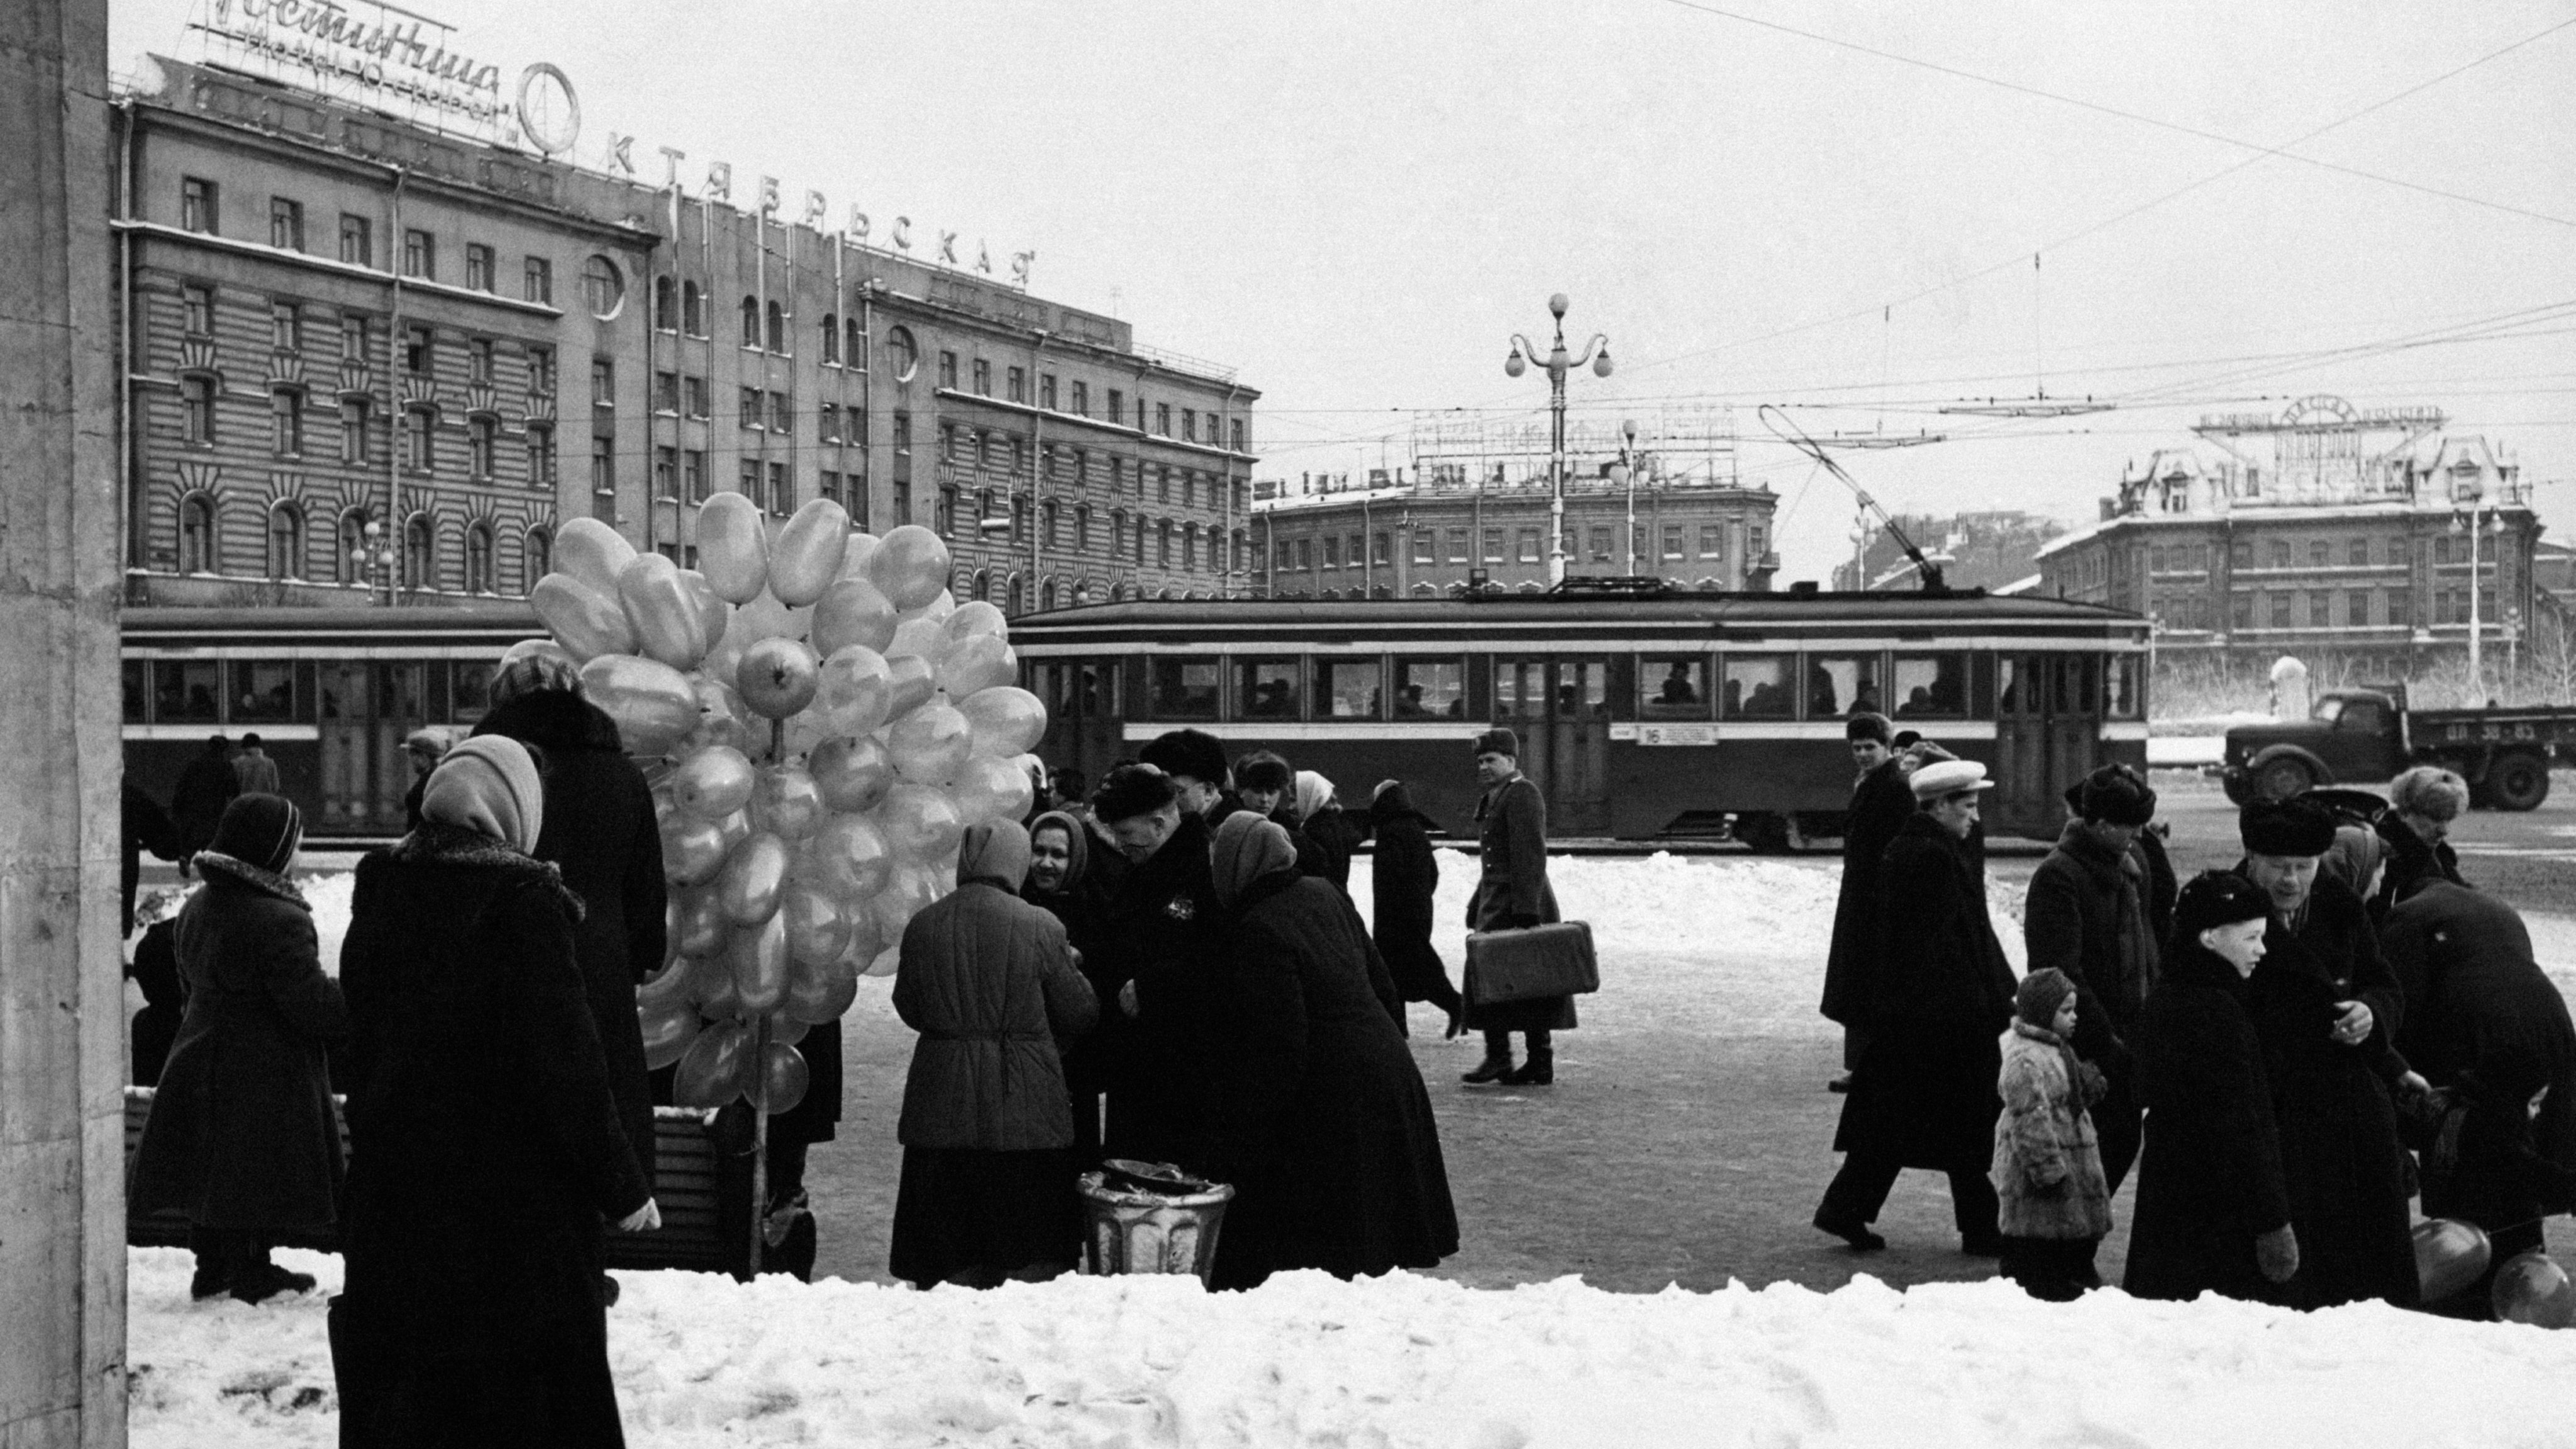 Some curious people next to a bunch of balloons in Vosstaniya Square in Leningrad